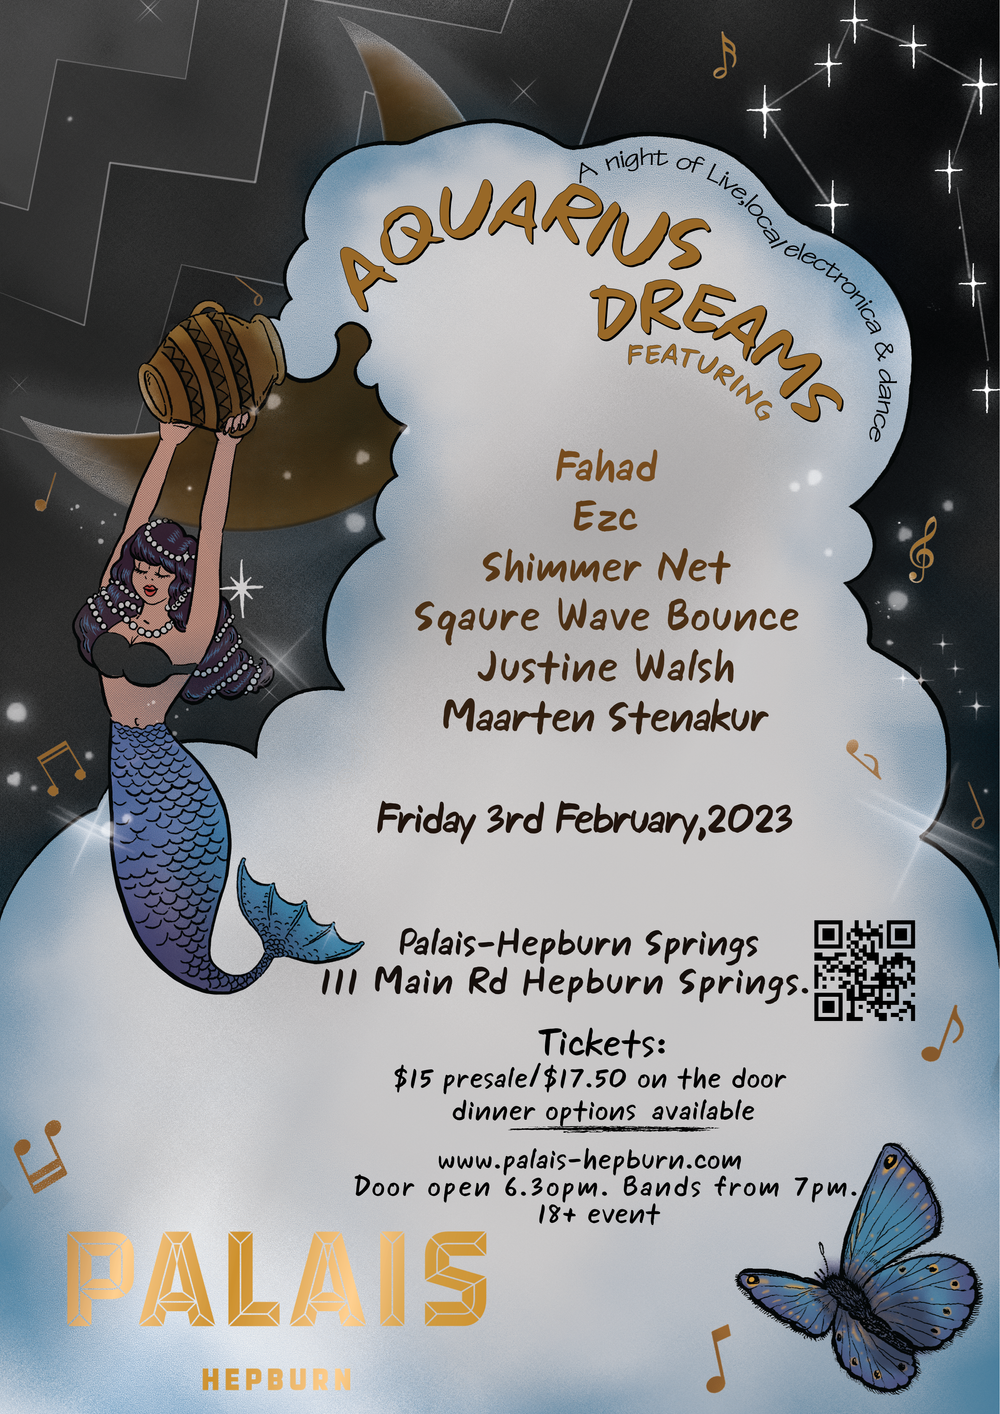 I am performing my music as part of Aquarius Dreams at the Palais Hepburn. 7pm, Friday 3rd February 2023. Click on image for link to event. 